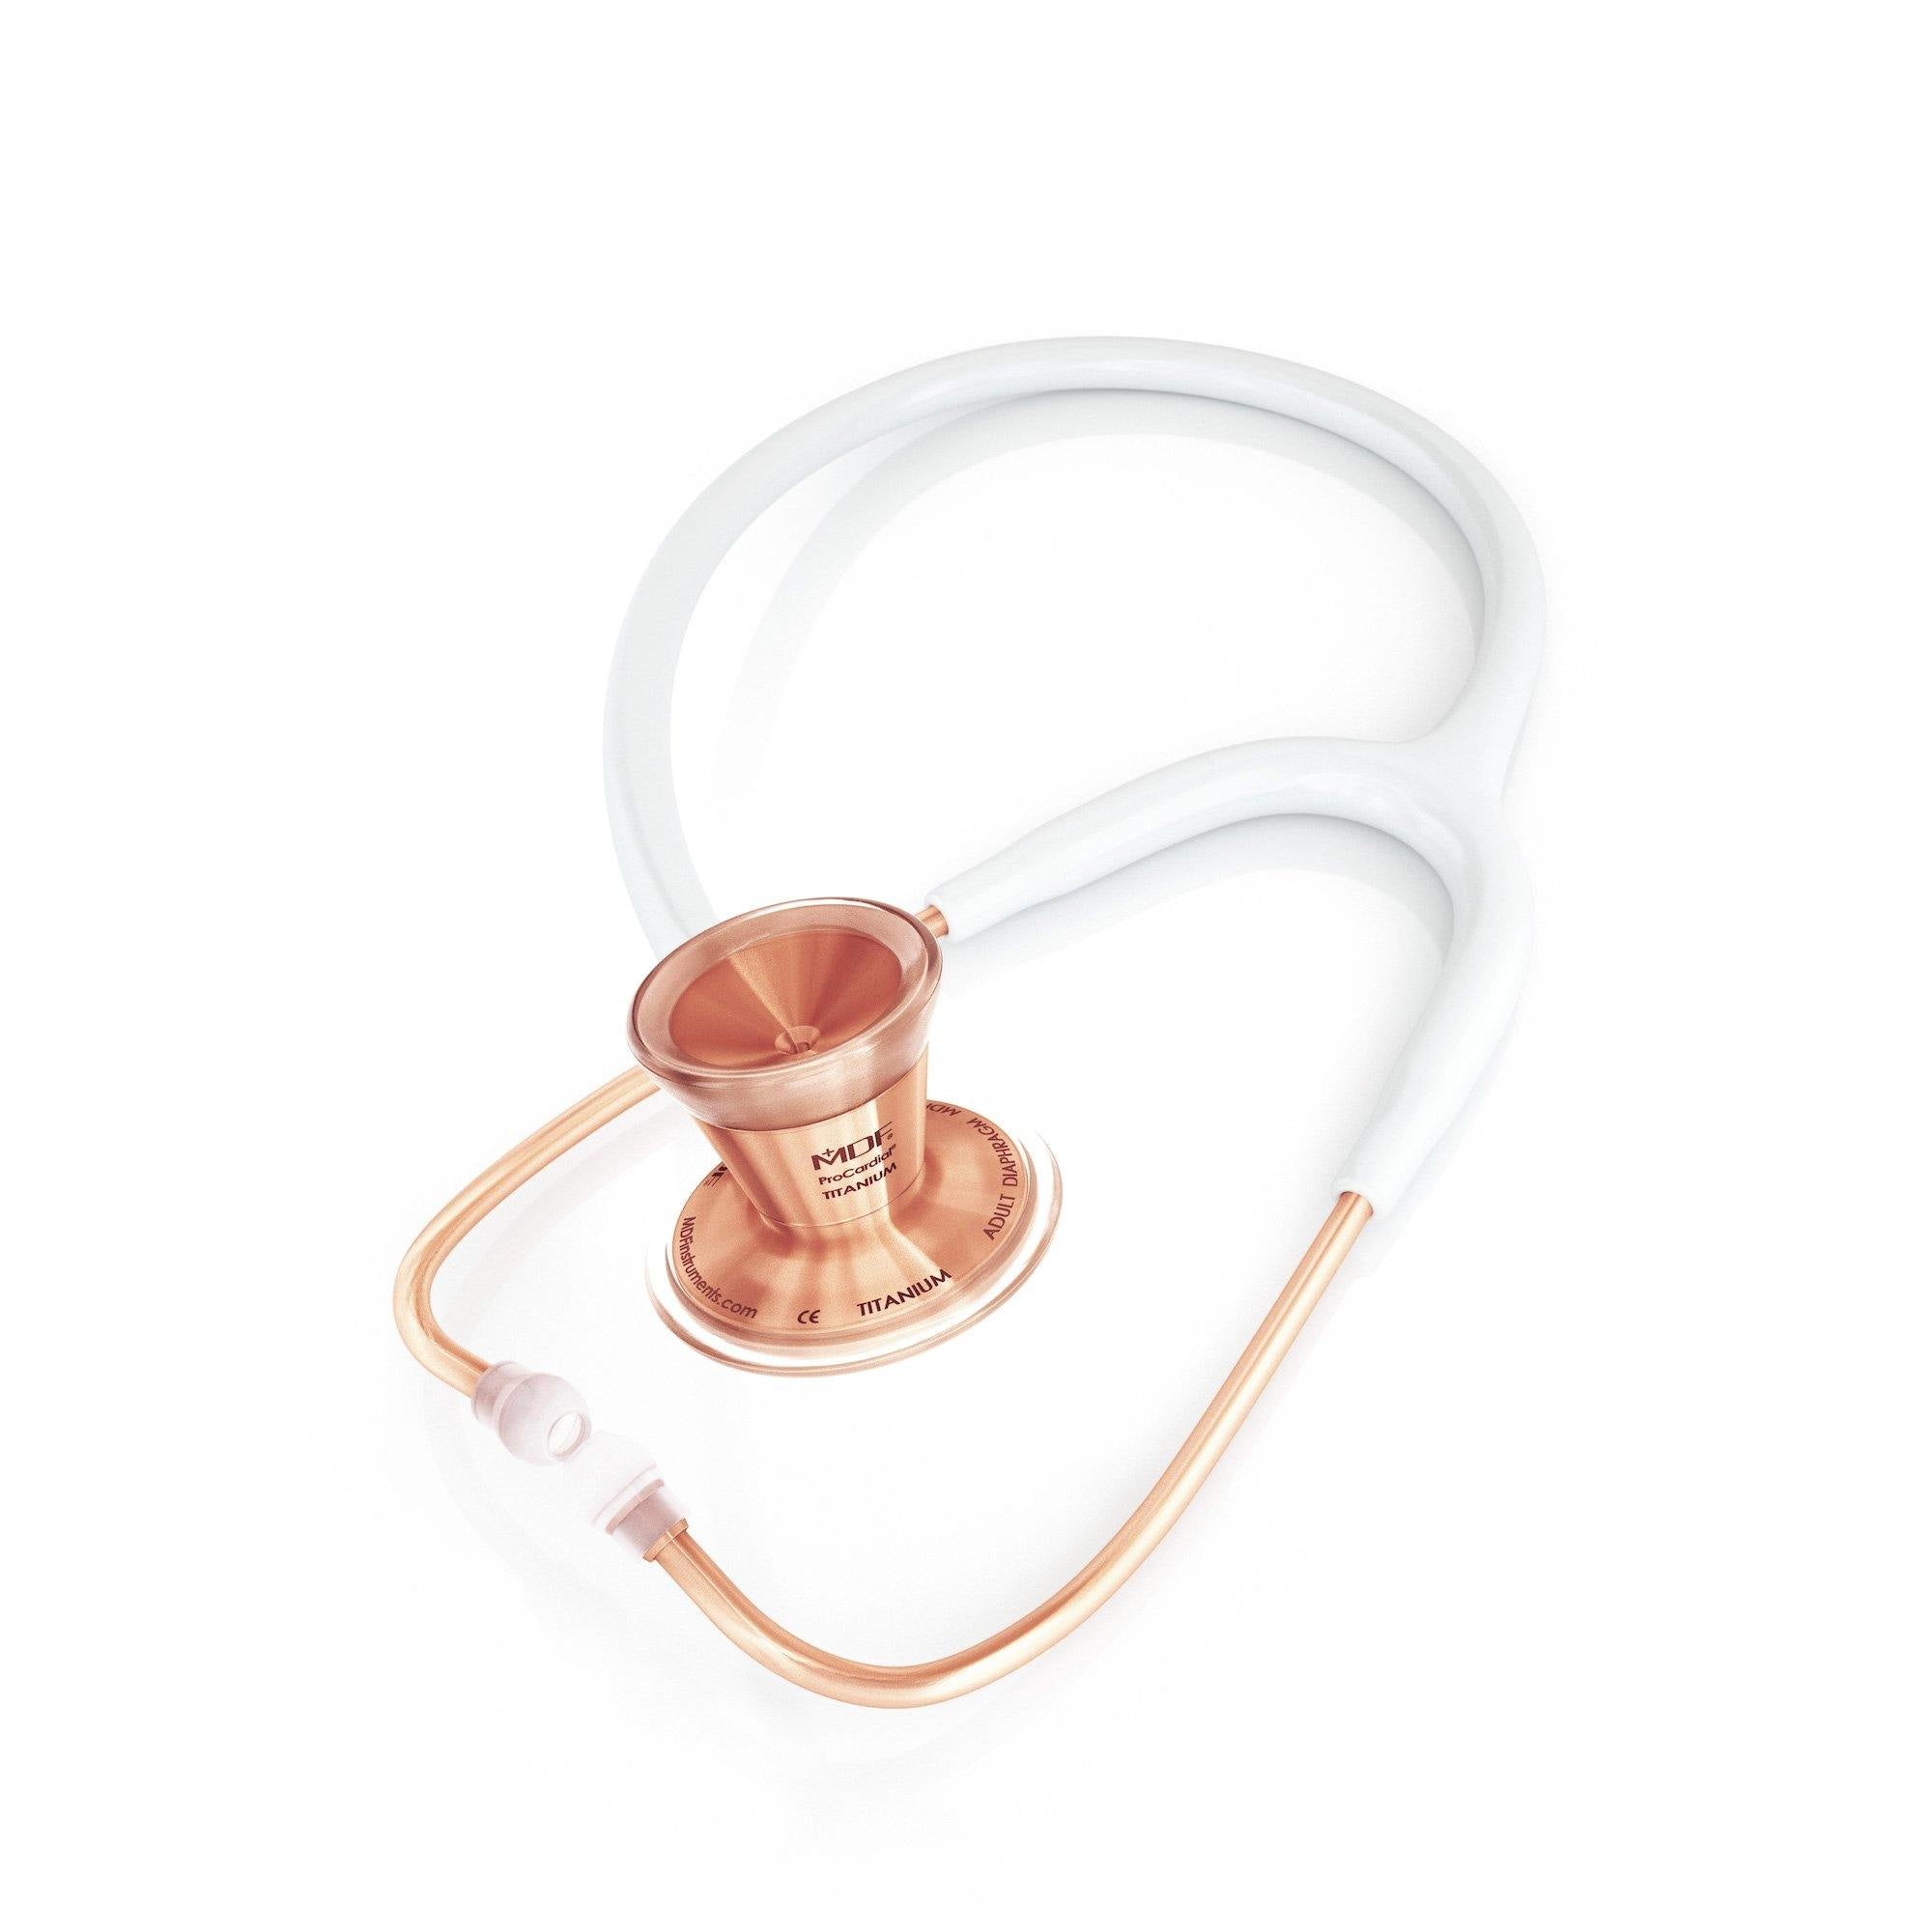 ProCardial® Titanium Cardiology Stethoscope - White/Rose Gold - MDF Instruments Official Store - Stethoscope